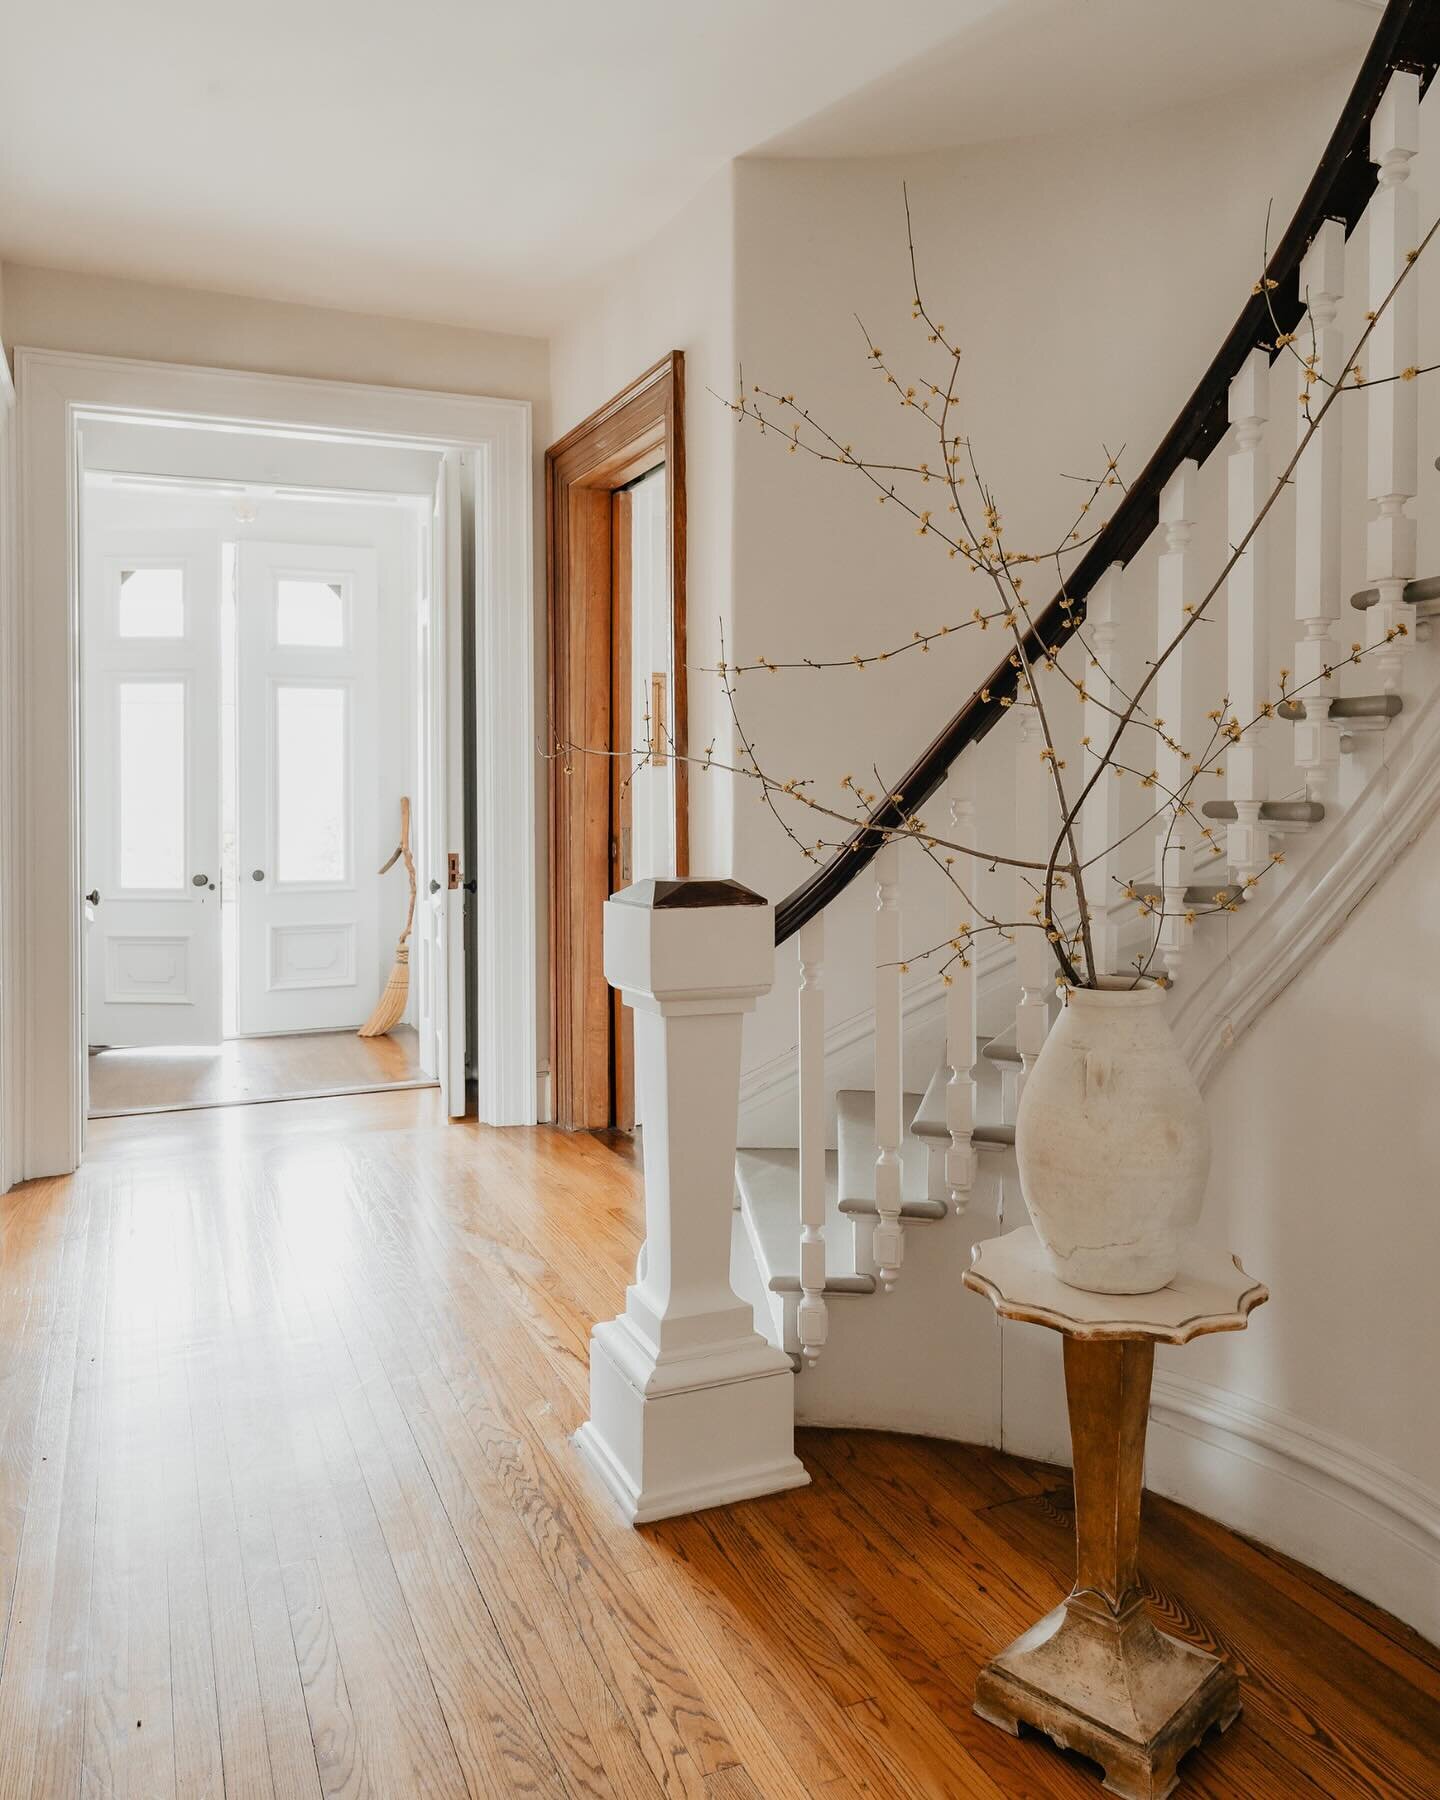 New Listing: Introducing Mill Daughter&rsquo;s Manor

An Exclusive New Listing by @ThisOldHudson 

Welcome to Mill Daughter&rsquo;s Manor, an exquisite example of Victorian architecture at its finest. Built in the 1870s, this historic home has been t